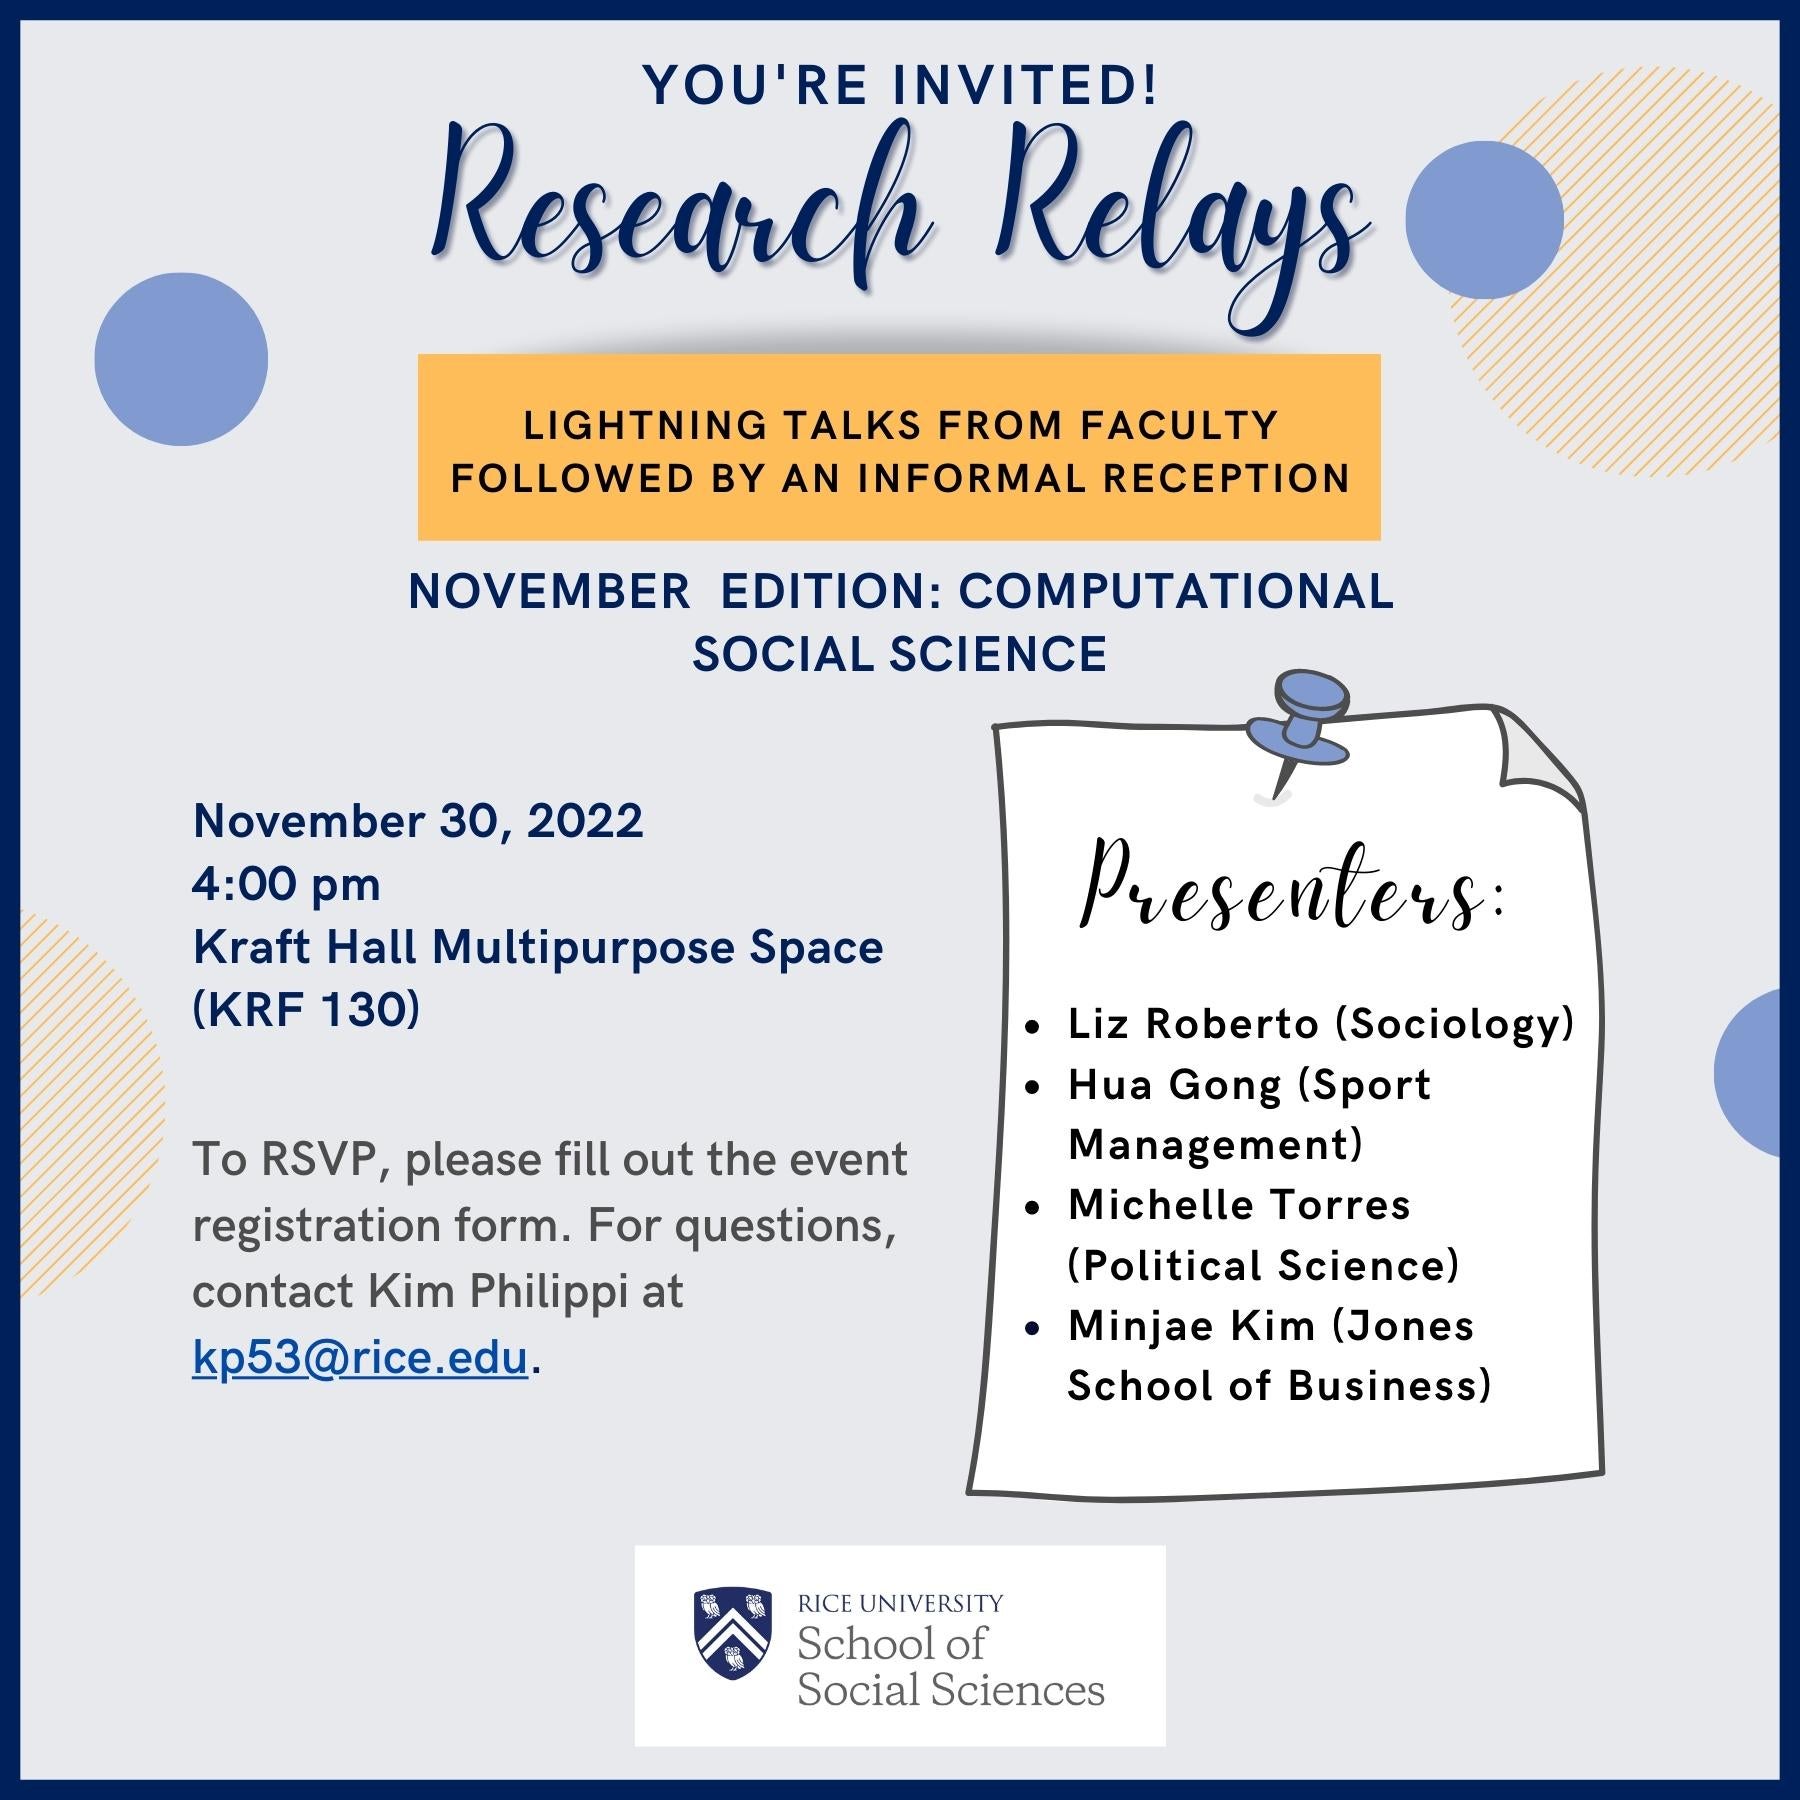 November 2022 Research Relays Event Flyer